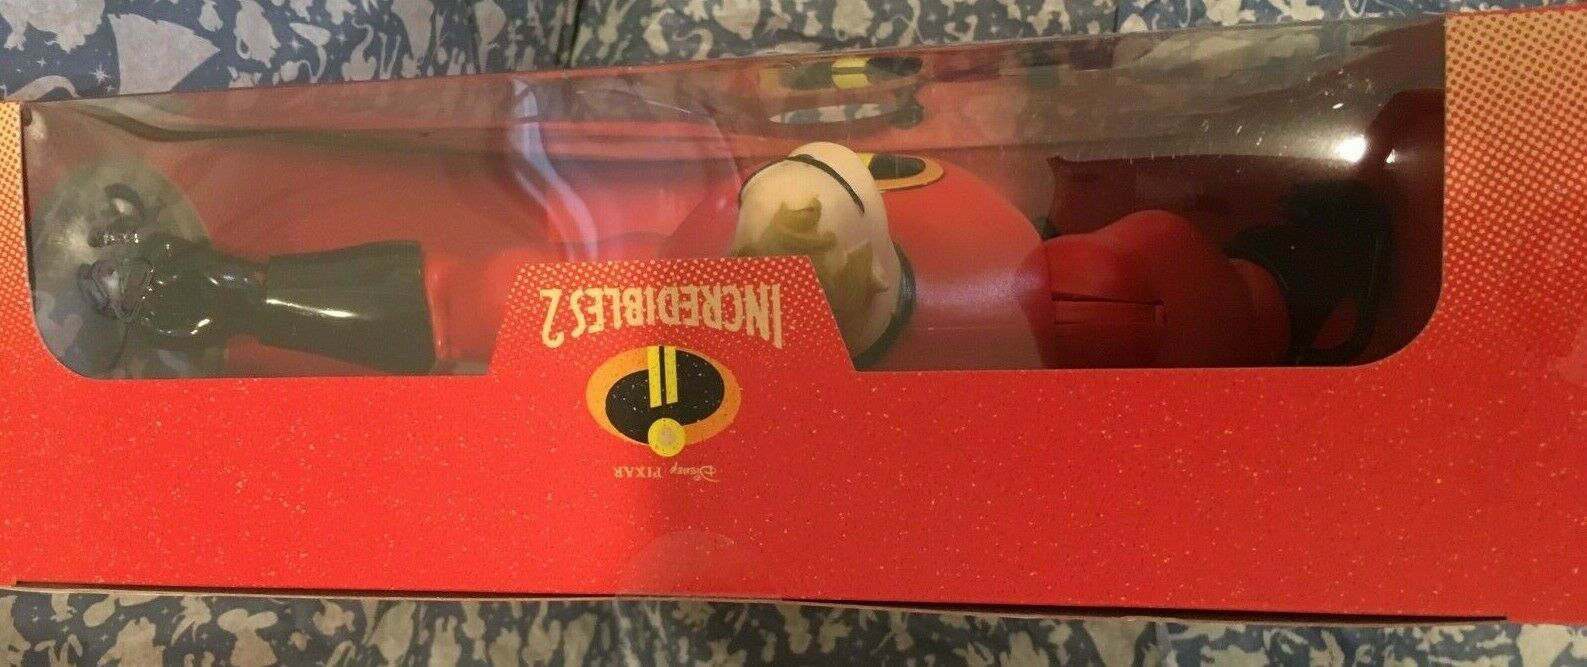 Disney Store Mr. Incredible Light-Up Talking Action Figure Incredibles 2 New